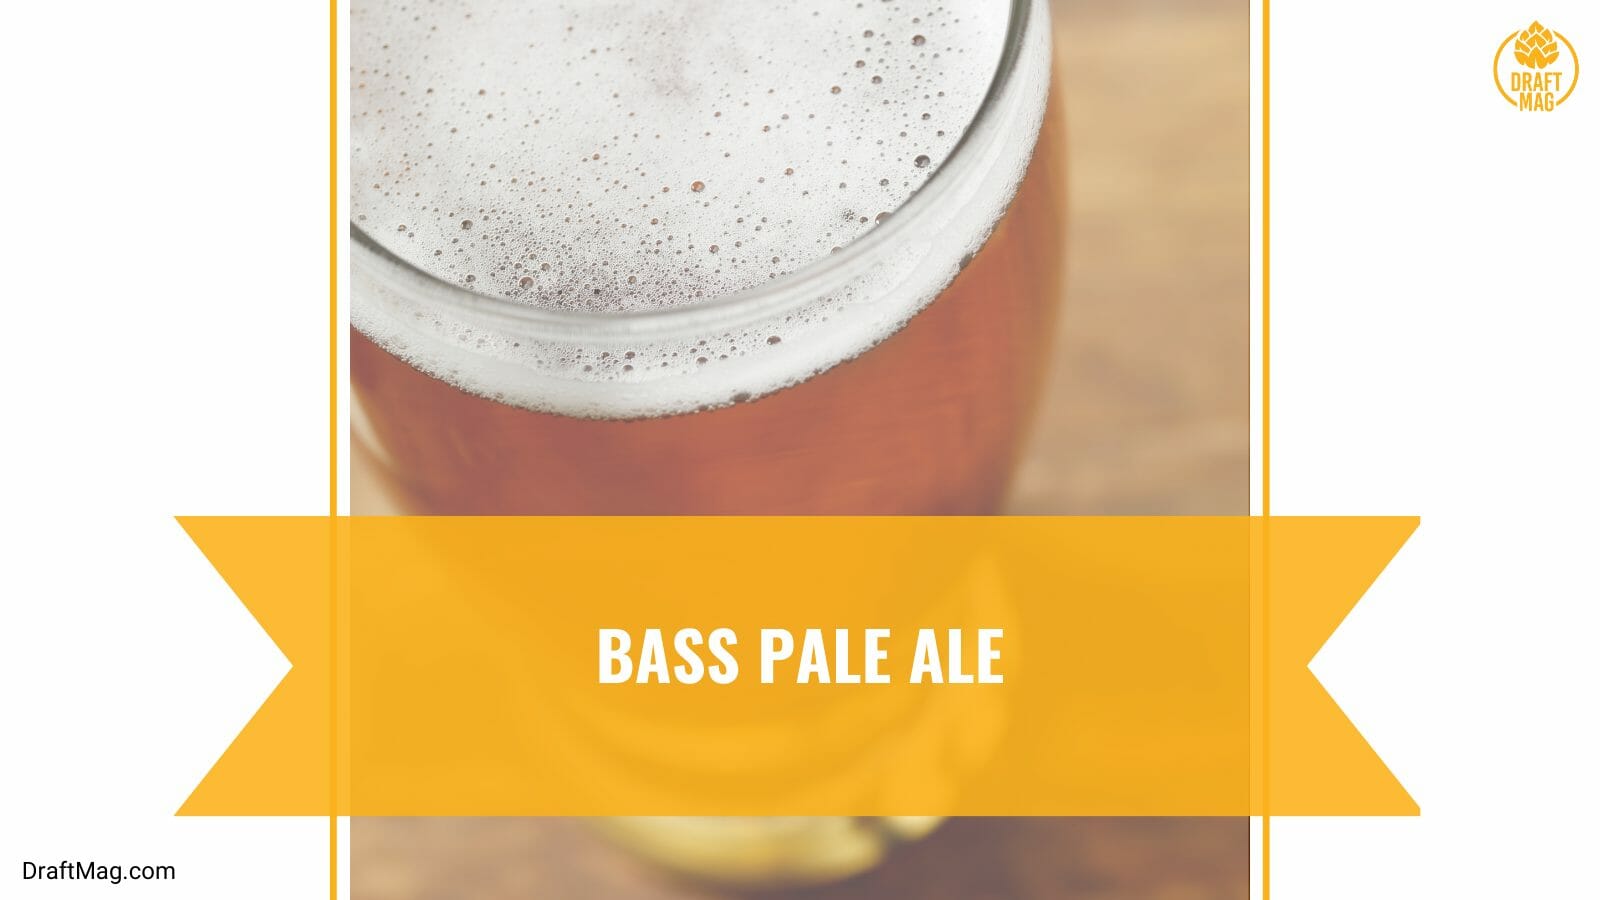 Bass pale ale with malty aroma